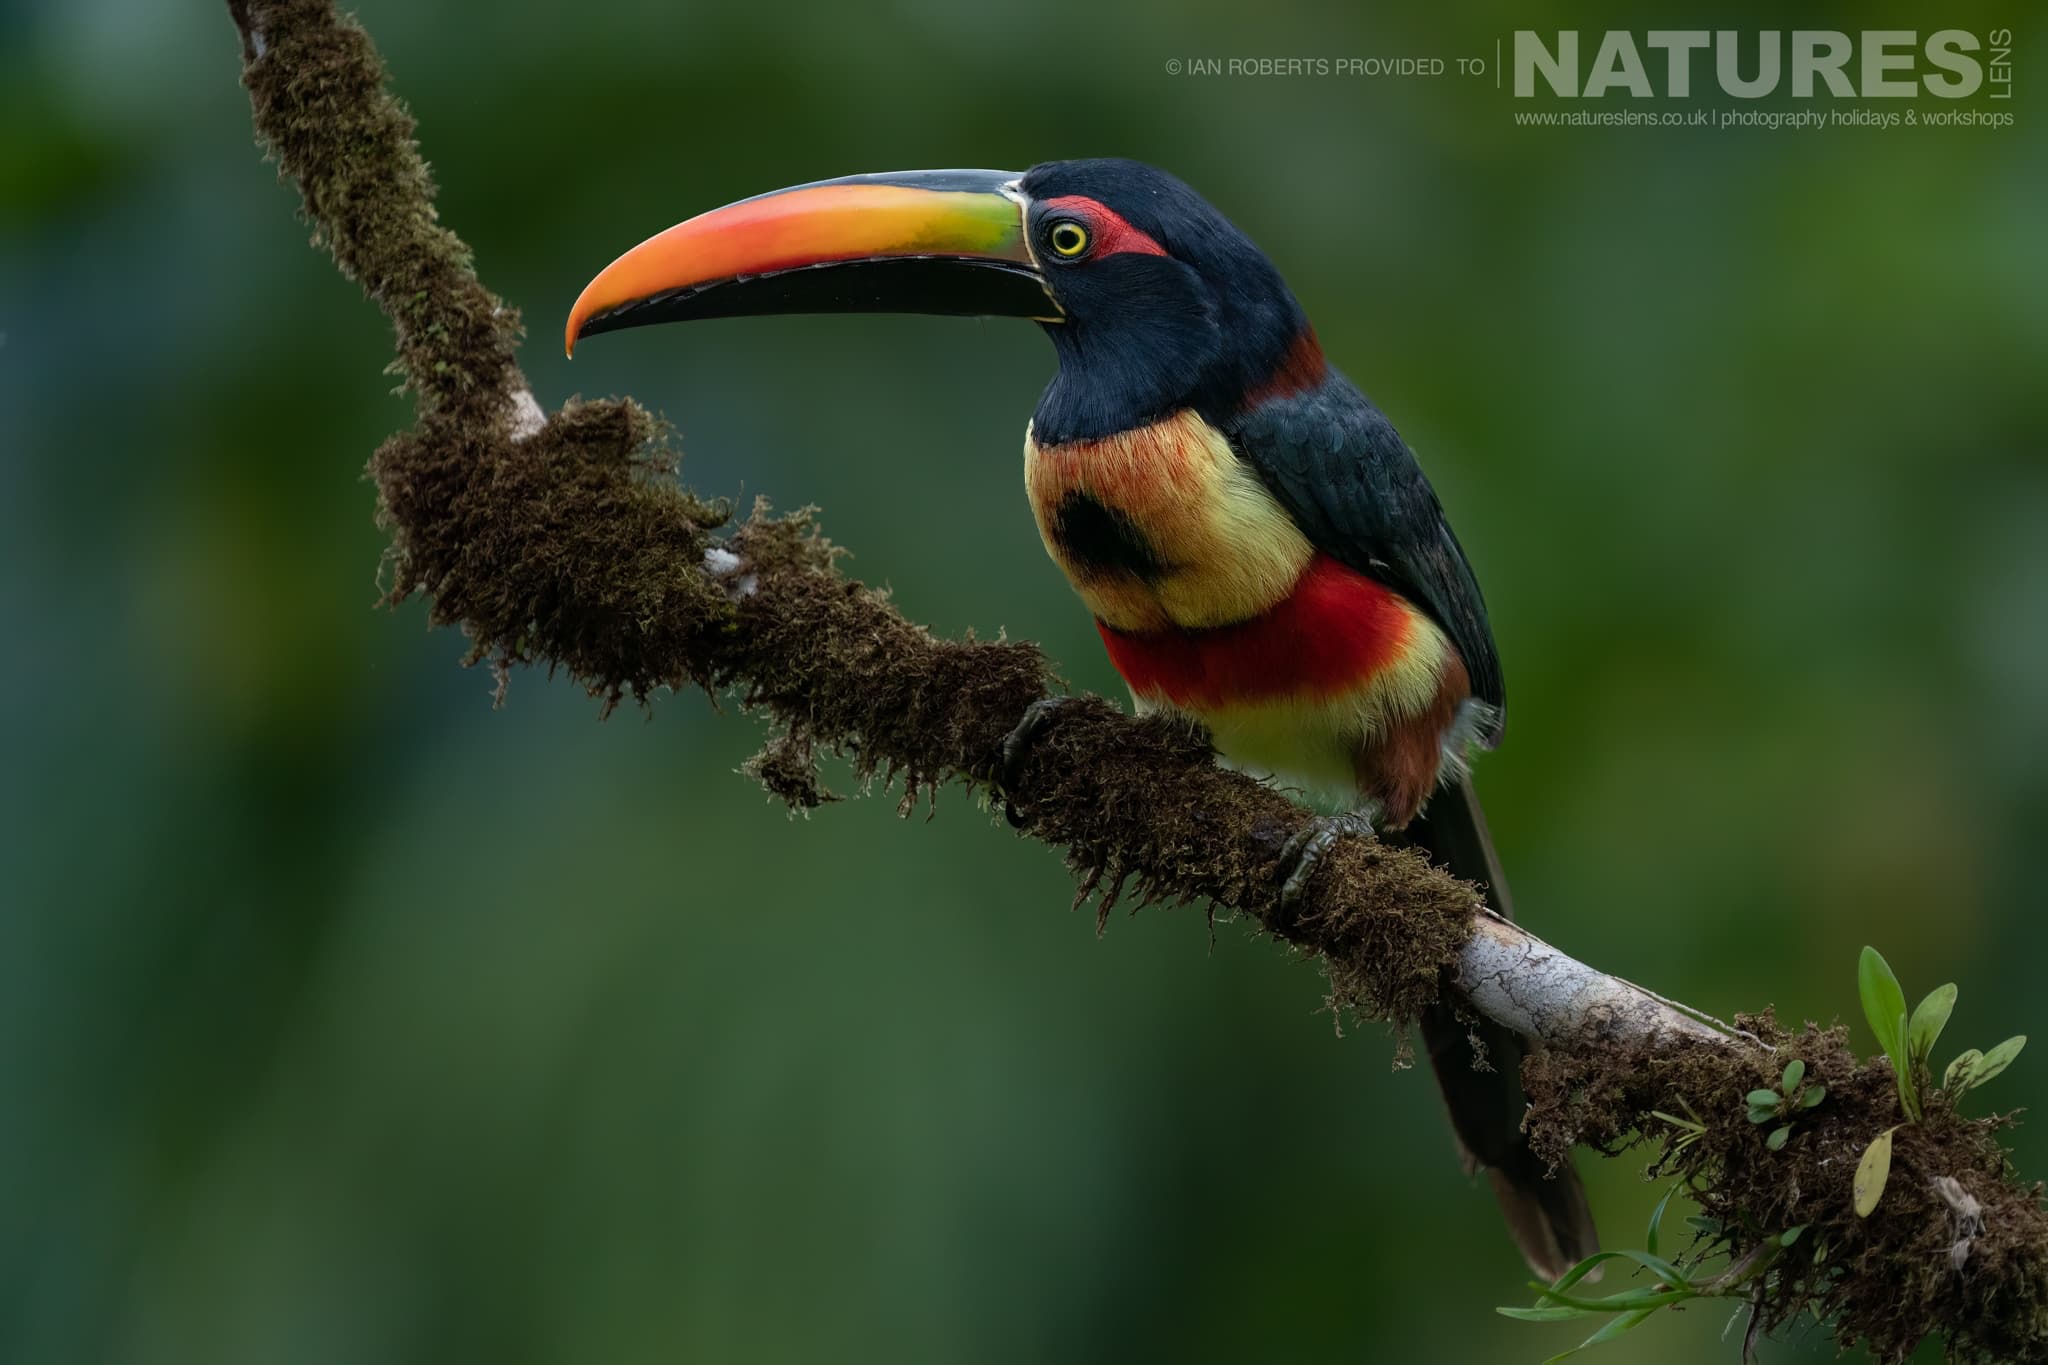 A Fiery Billed Aracari One Of The Toucans In Costa Rica